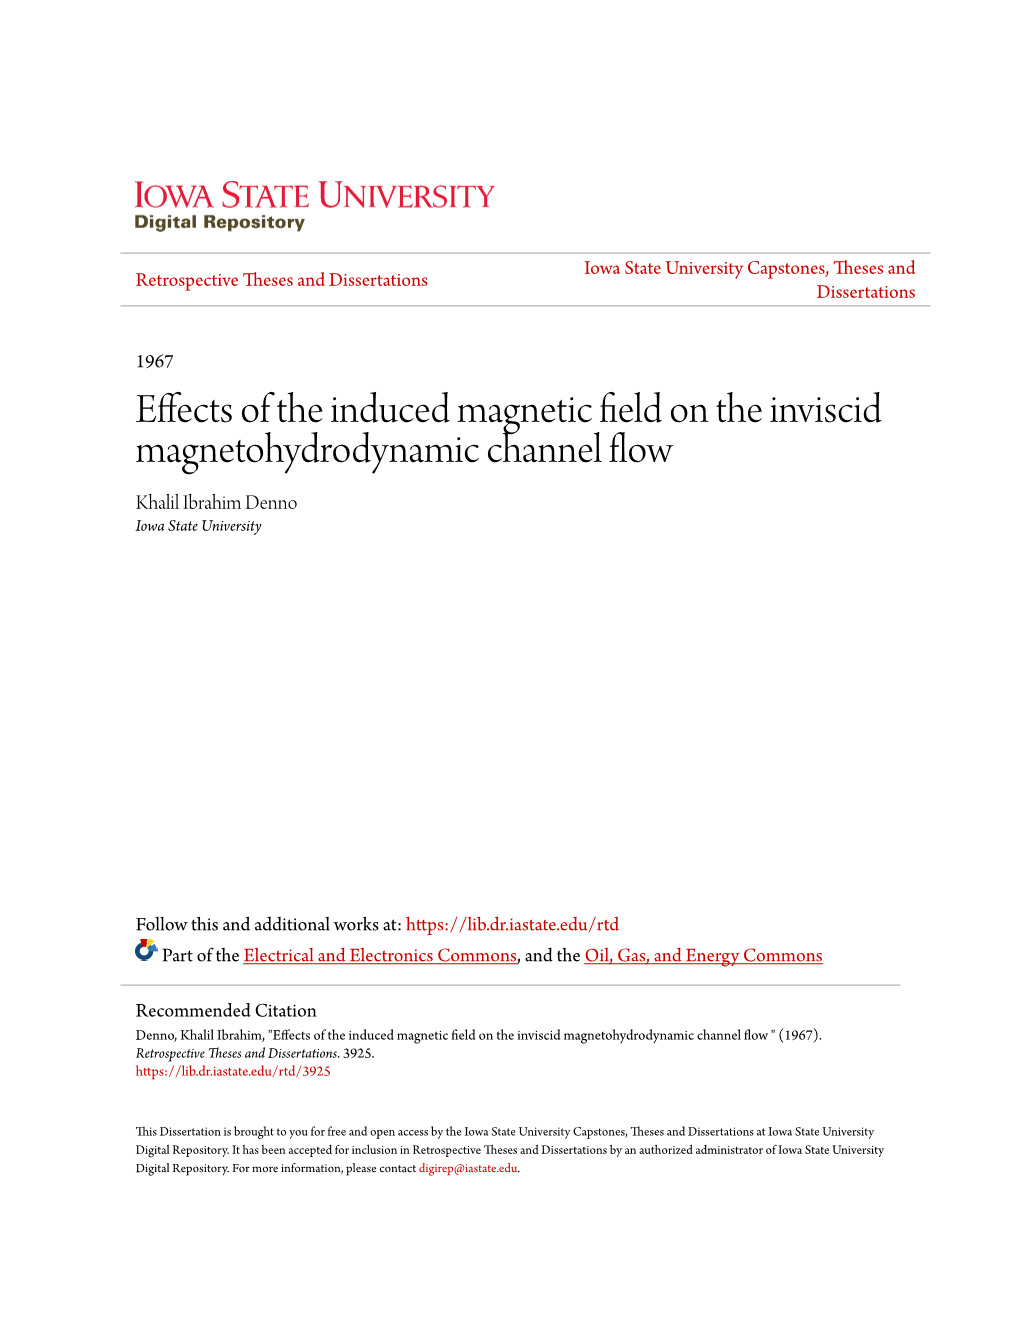 Effects of the Induced Magnetic Field on the Inviscid Magnetohydrodynamic Channel Flow Khalil Ibrahim Denno Iowa State University